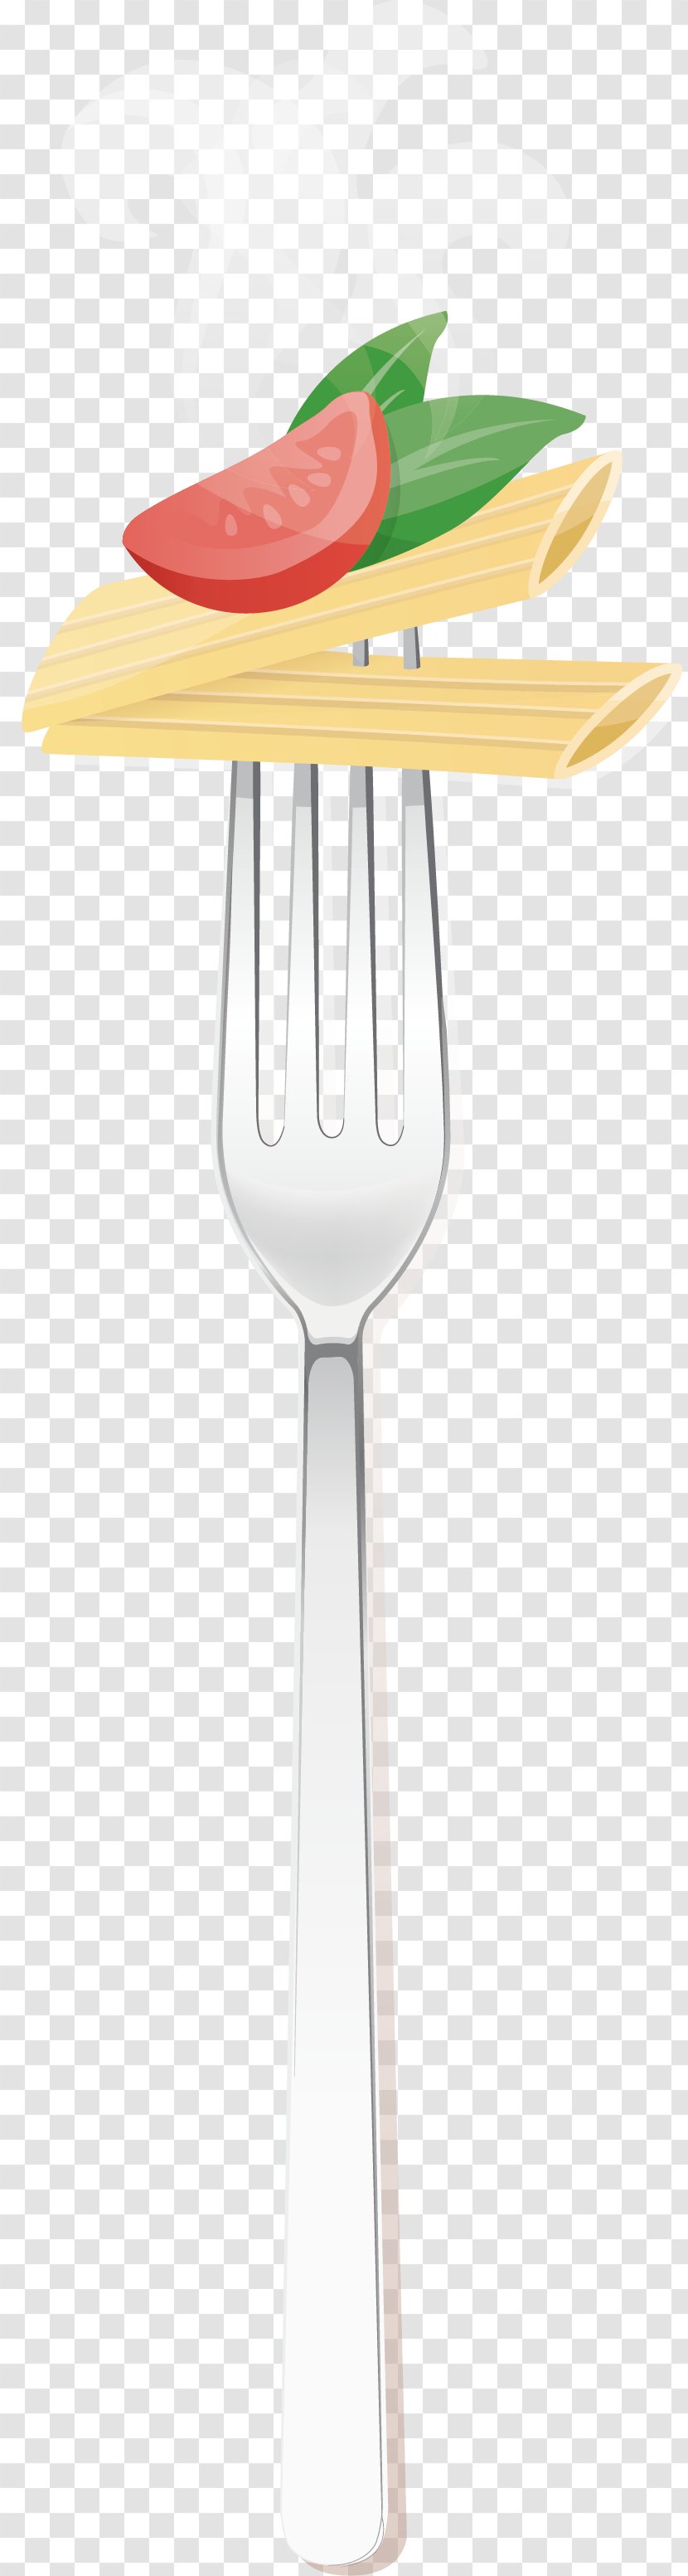 Fork Knife - Spoon - Vector Fruit And Transparent PNG